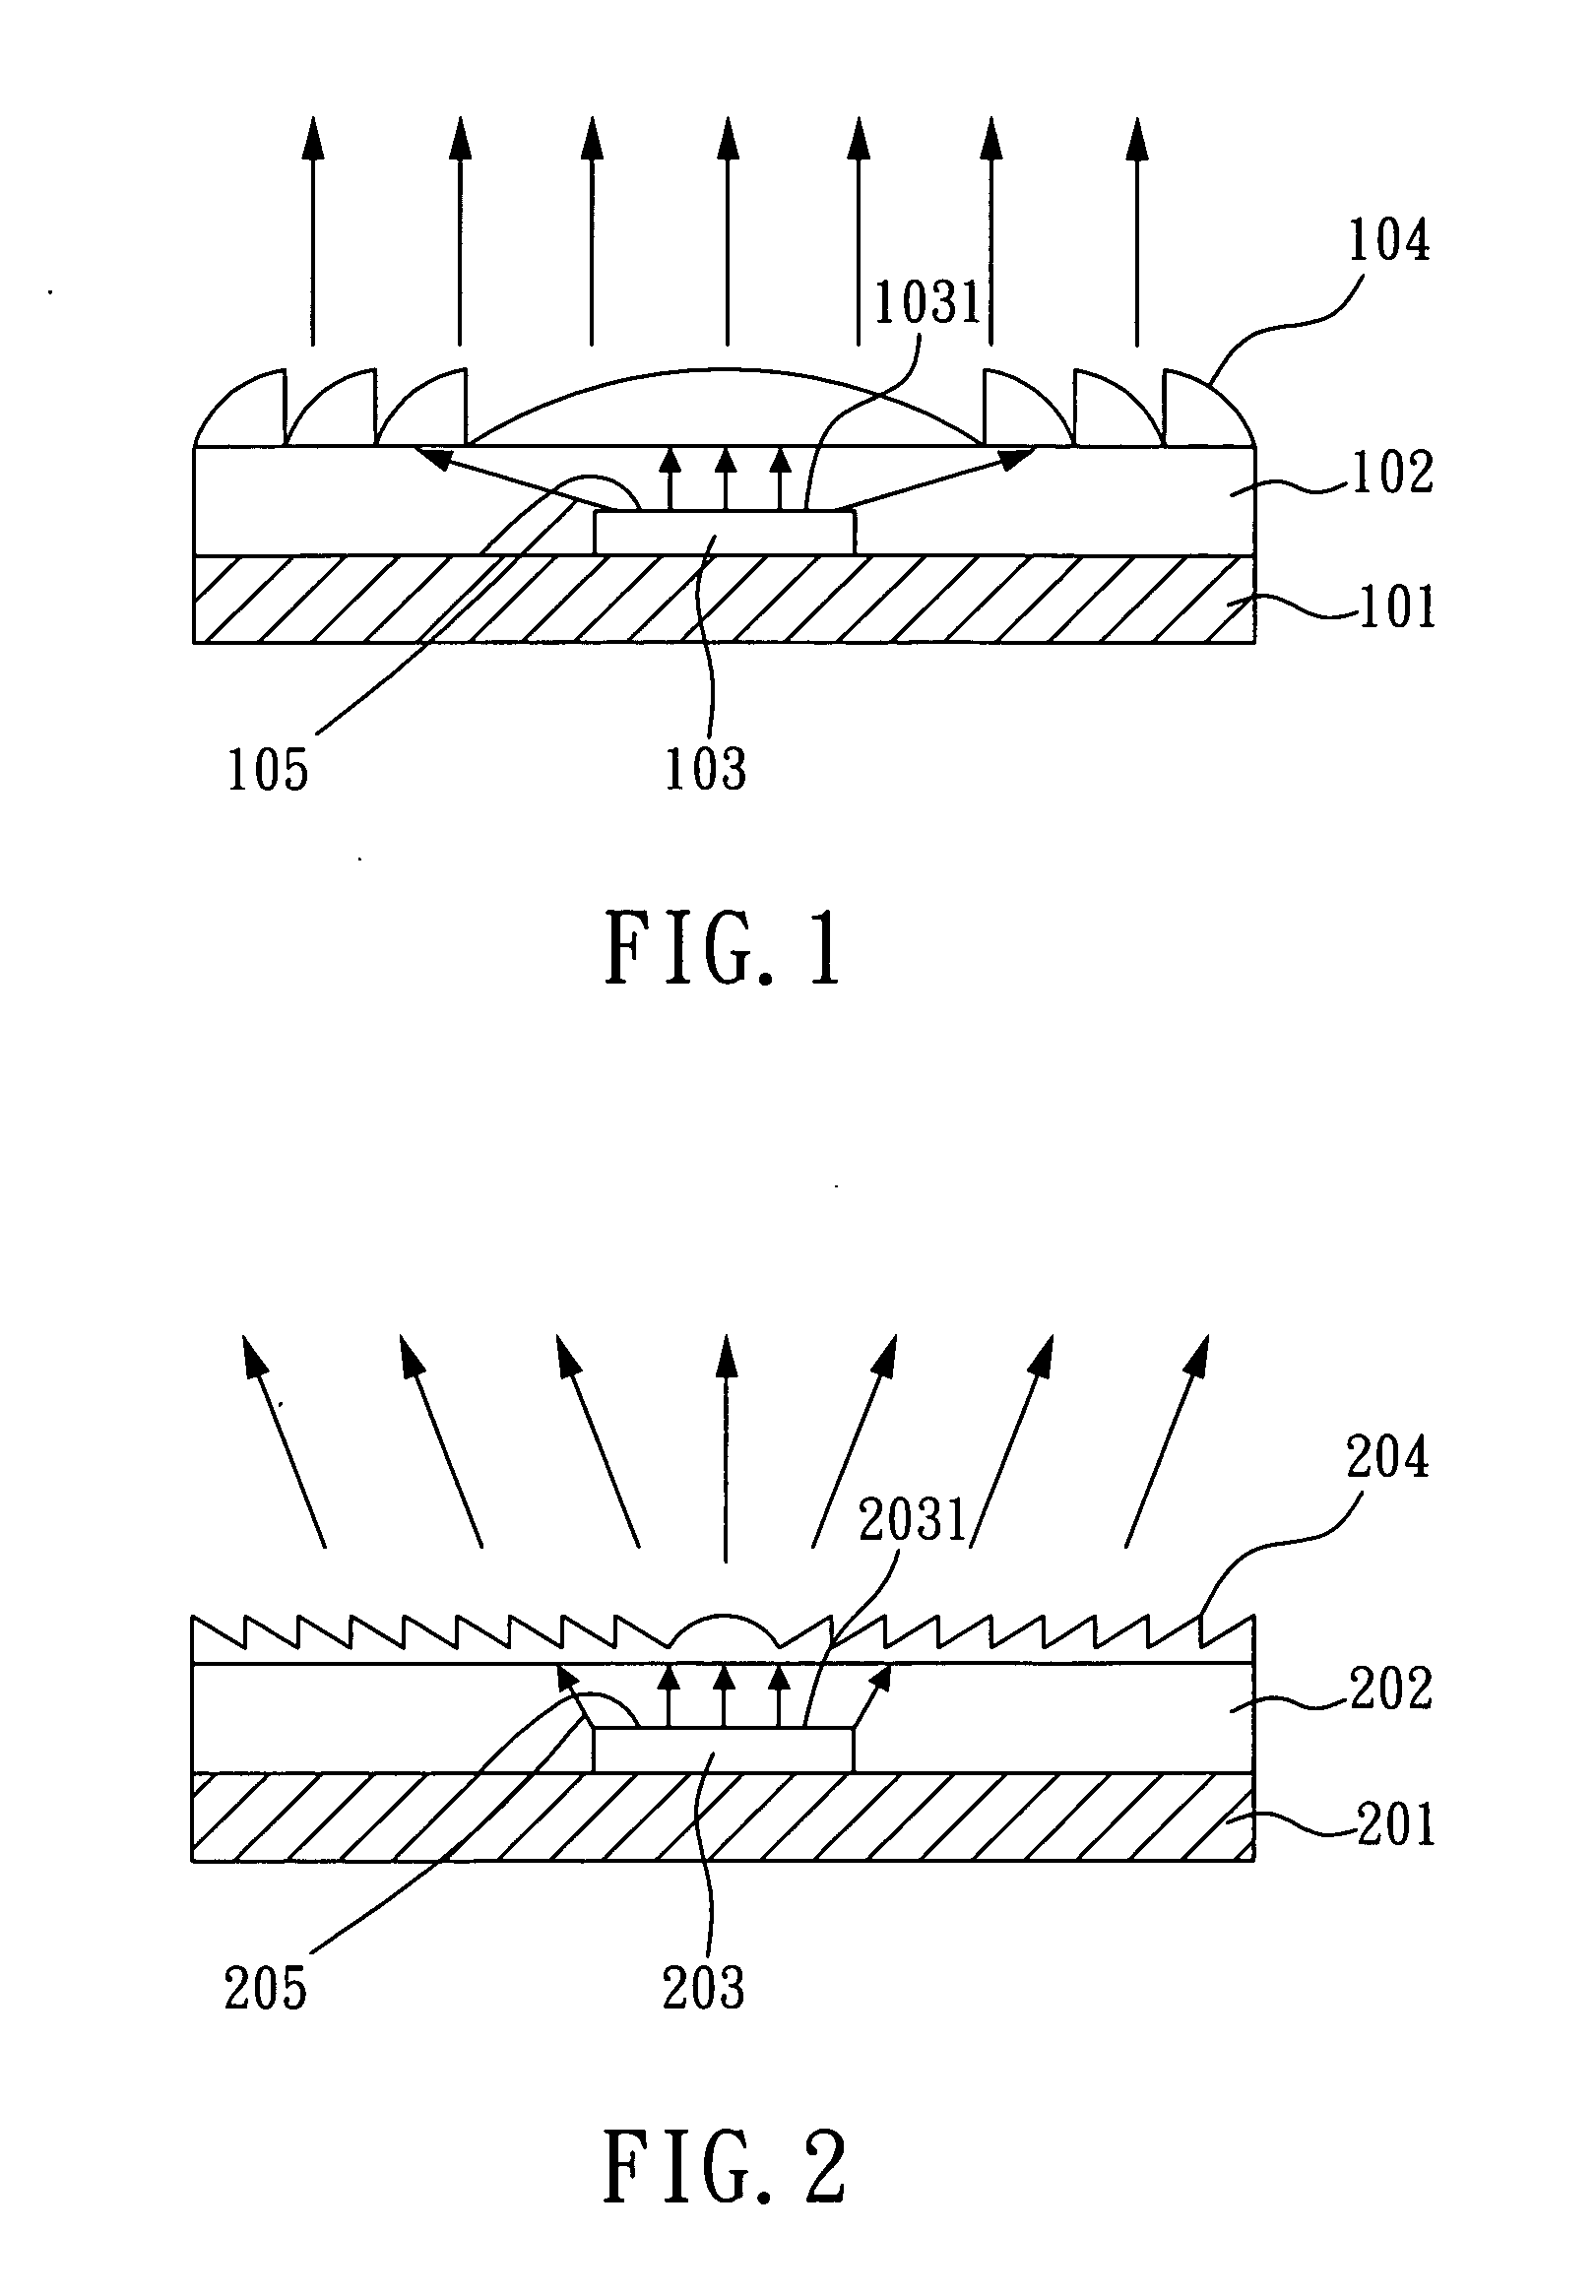 Planar package structure for high power light emitting diode